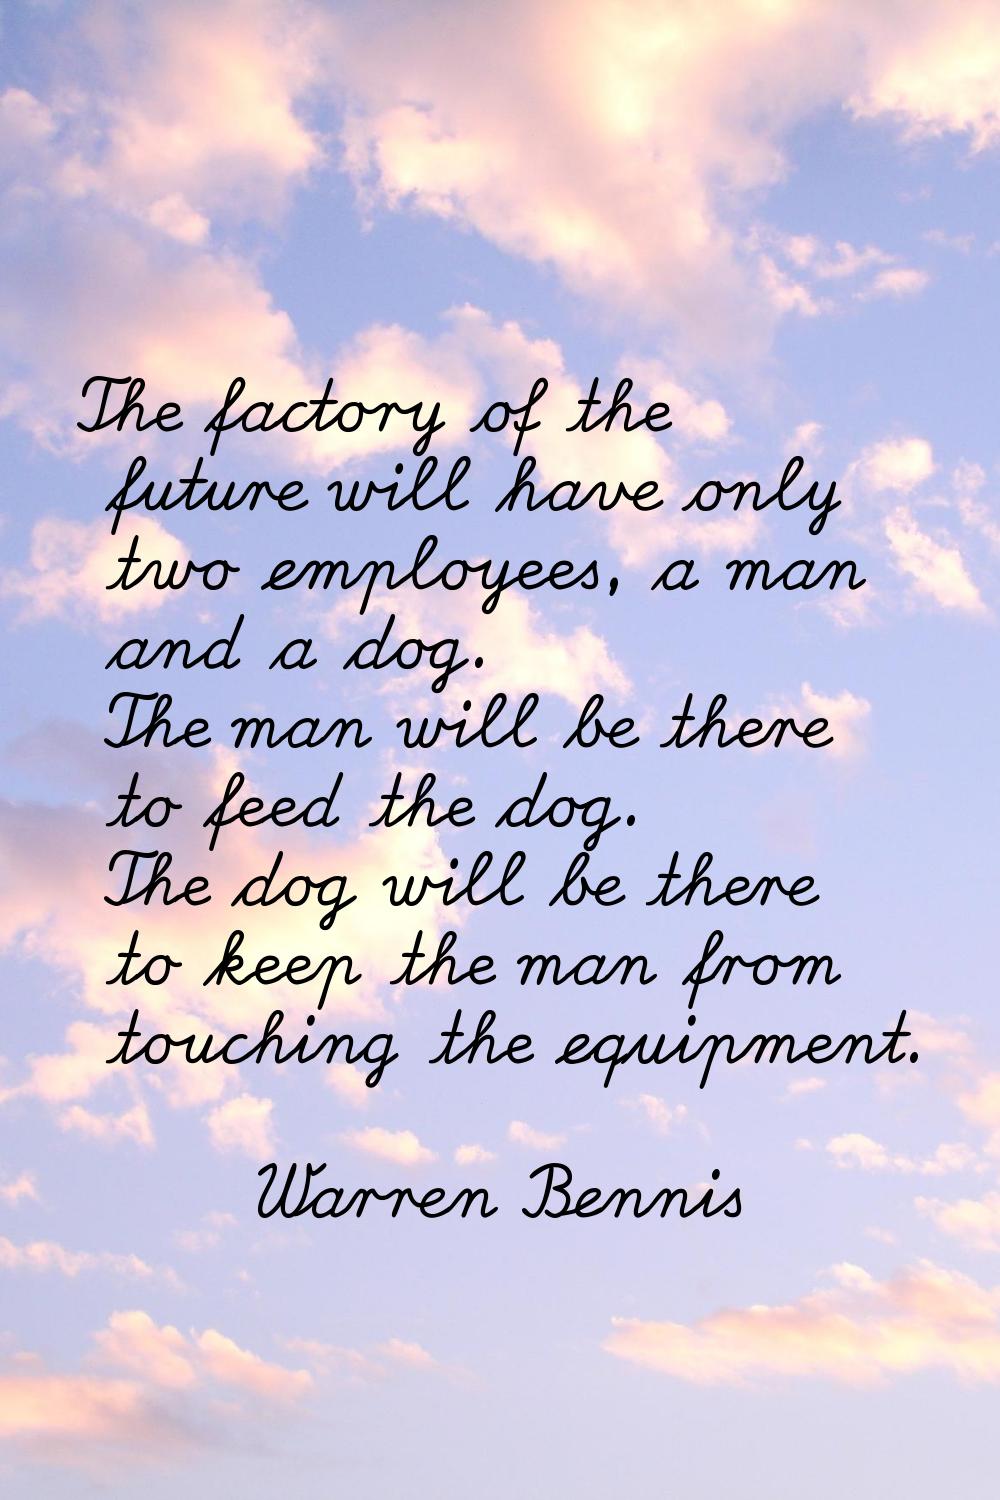 The factory of the future will have only two employees, a man and a dog. The man will be there to f